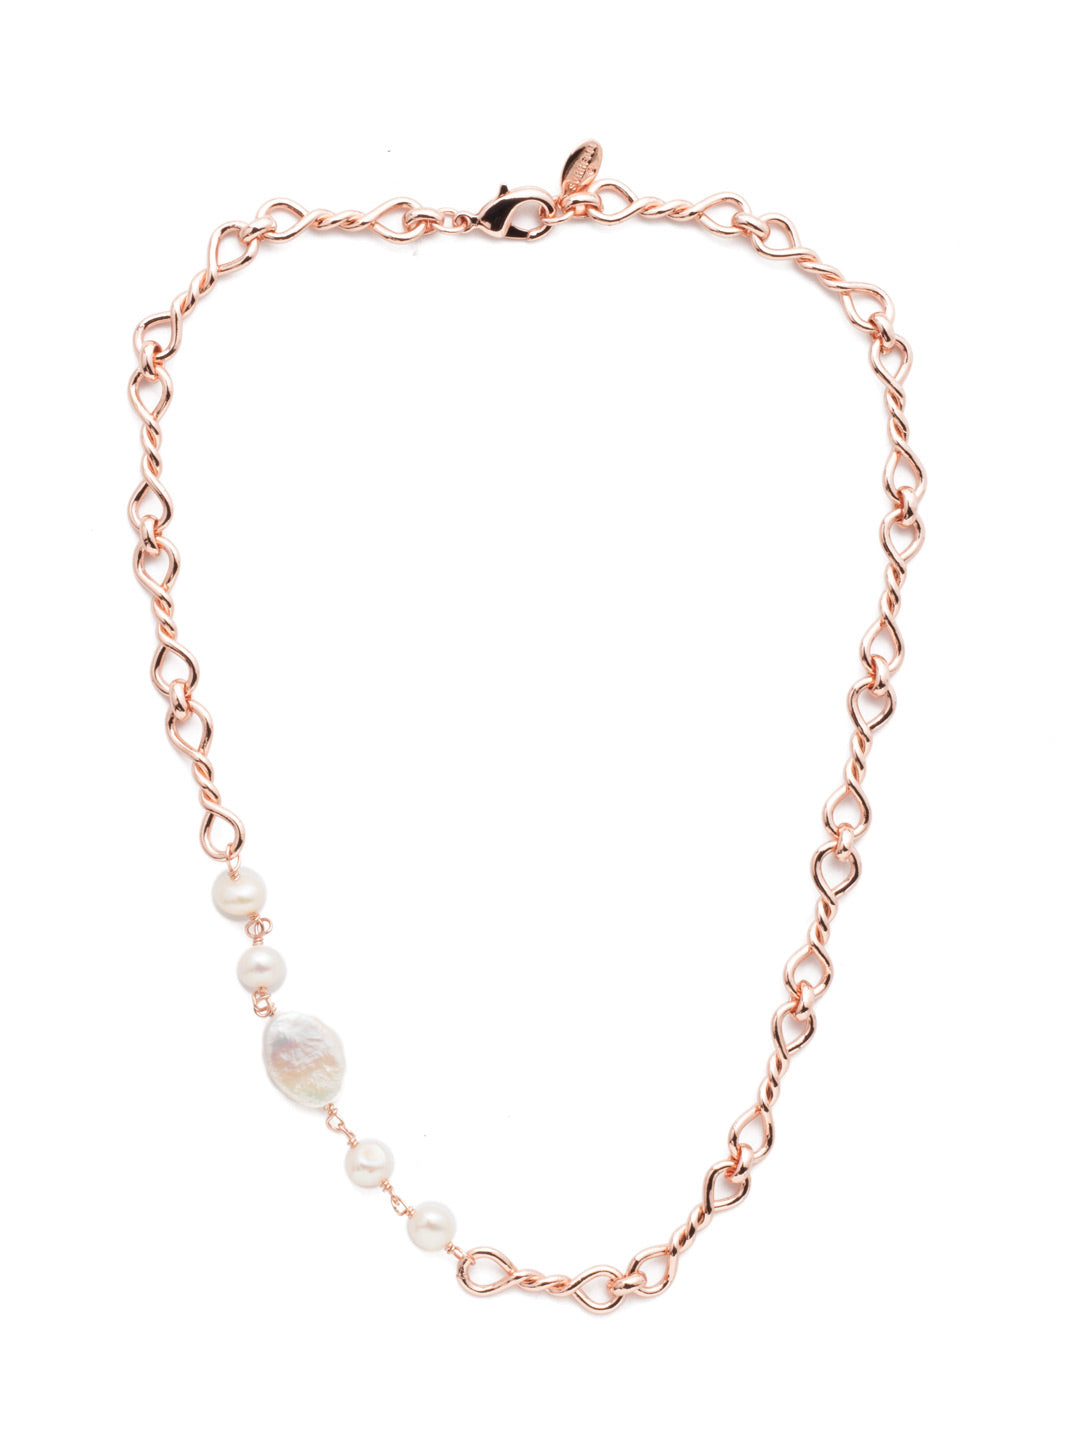 Yvette Tennis Necklace - NES34RGCRY - <p>The Yvette Tennis Necklace is a classic chain with freshwater pearl accents.  Wear it by itself or attach a crystal charm for some sparkle. From Sorrelli's Crystal collection in our Rose Gold-tone finish.</p>